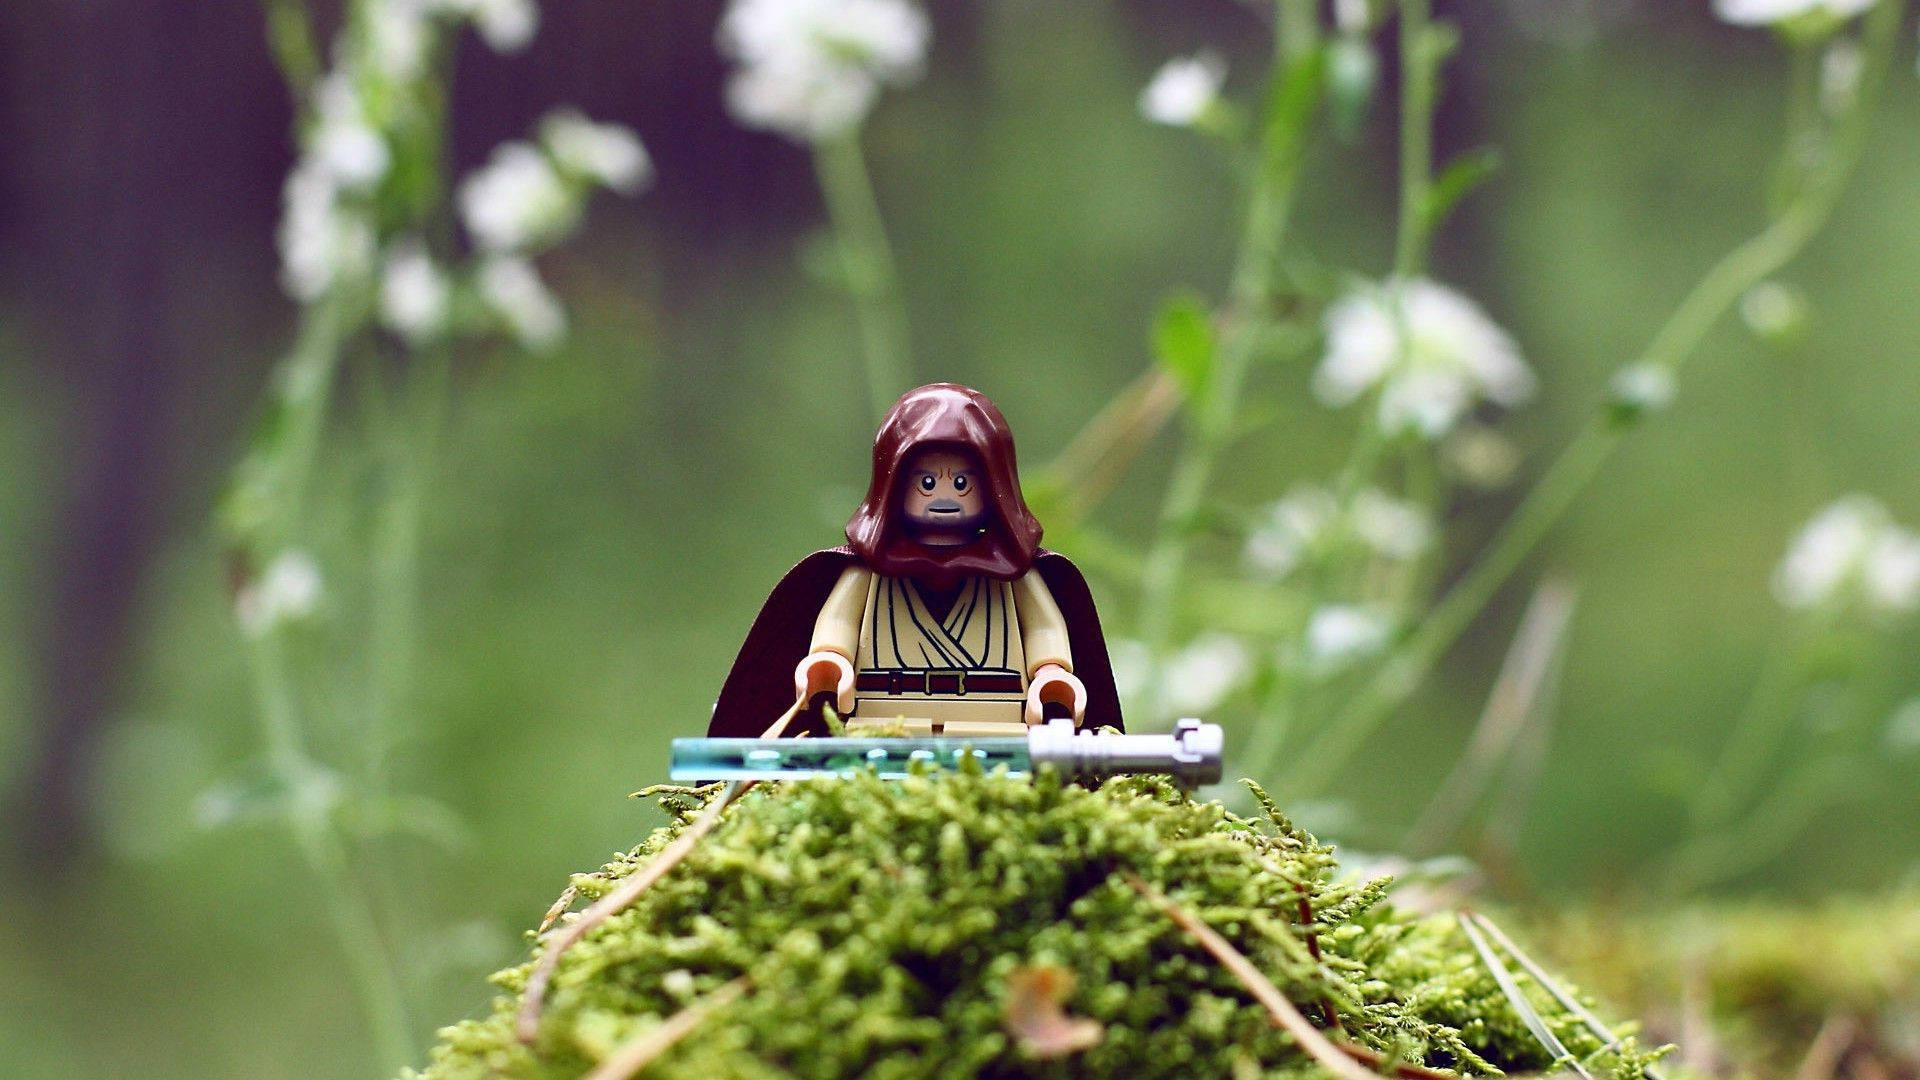 Lego Star Wars With Obi-wan Mourning Wallpaper